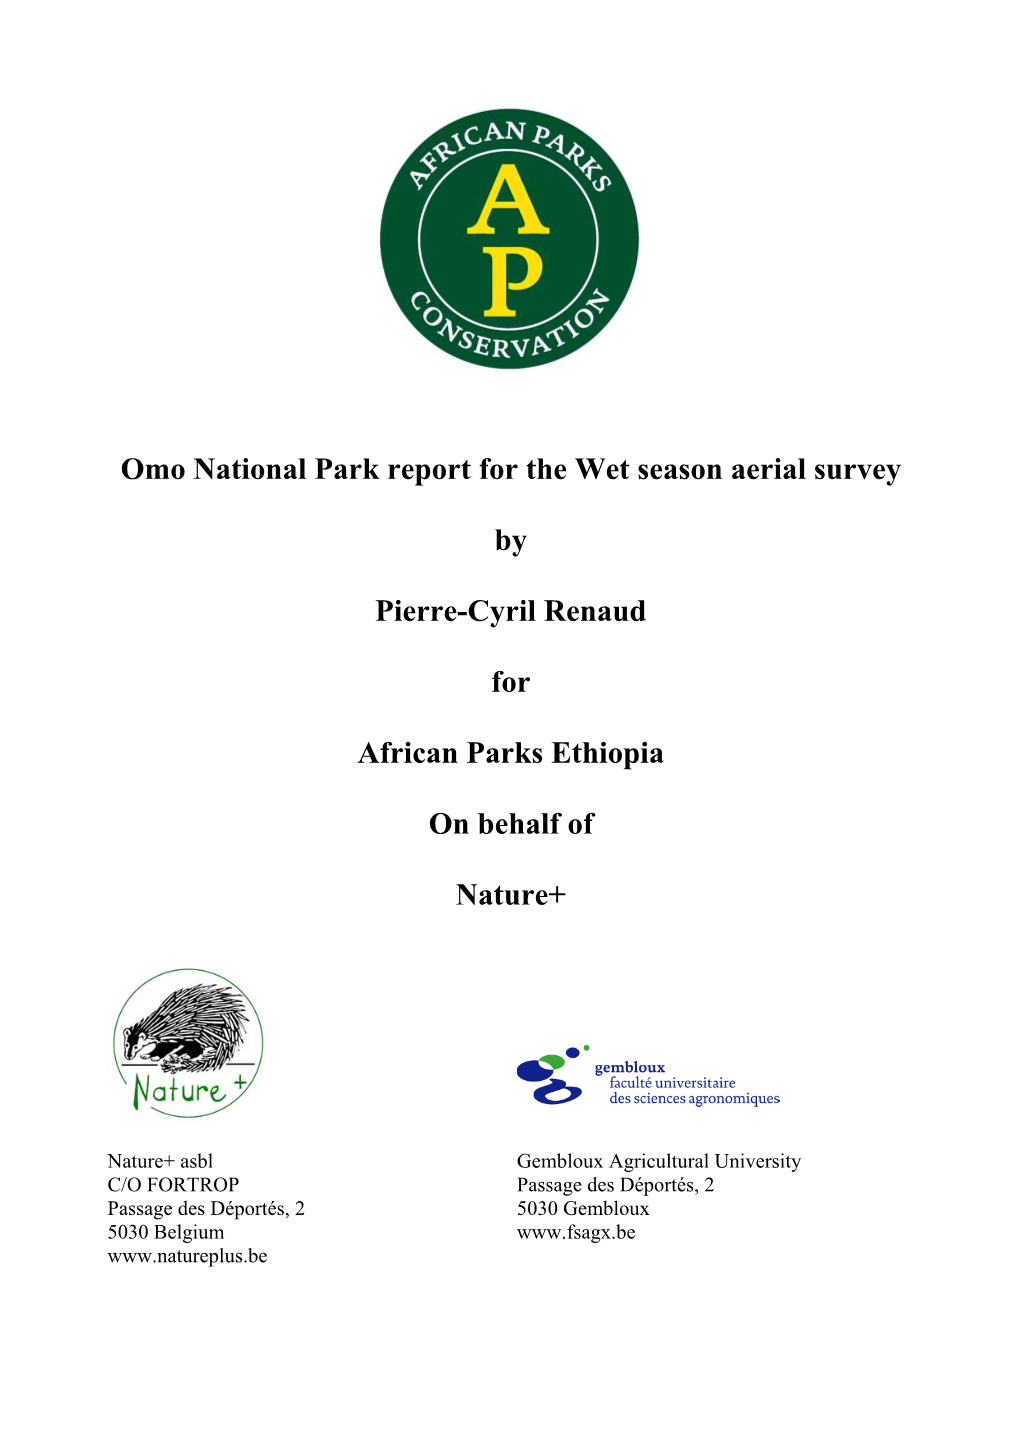 Omo National Park Report for the Wet Season Aerial Survey by Pierre-Cyril